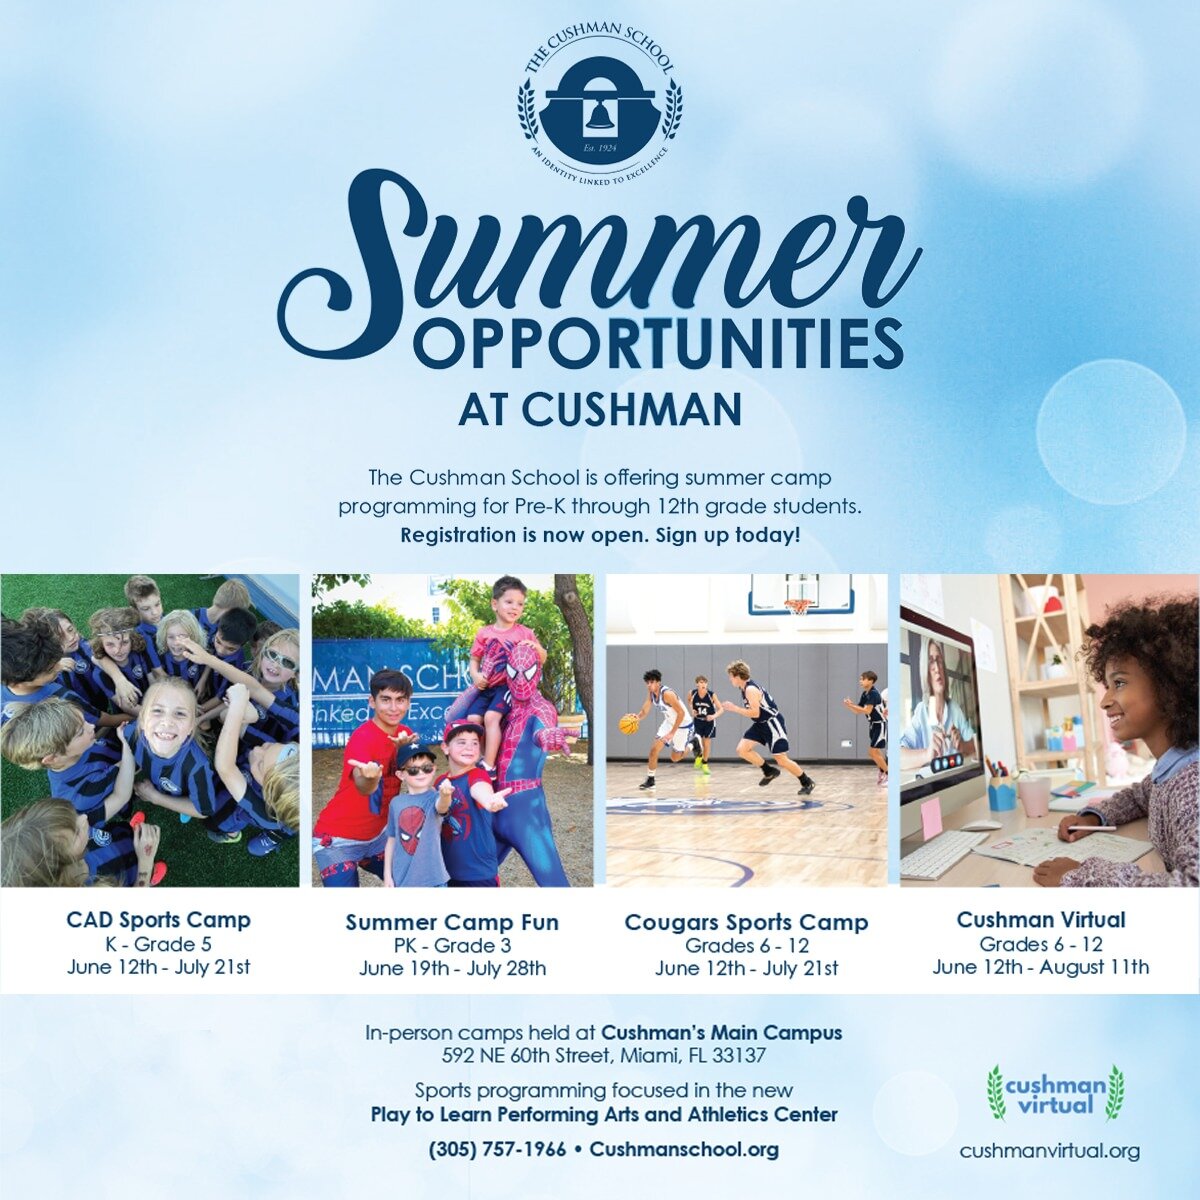 We are offering several summer camp options at Cushman for Pre-K through 12th grade students as well as Cushman Virtual academic, online programming for 6-12 graders! Looking to keep your children and teens productive, active and engaged this summer?